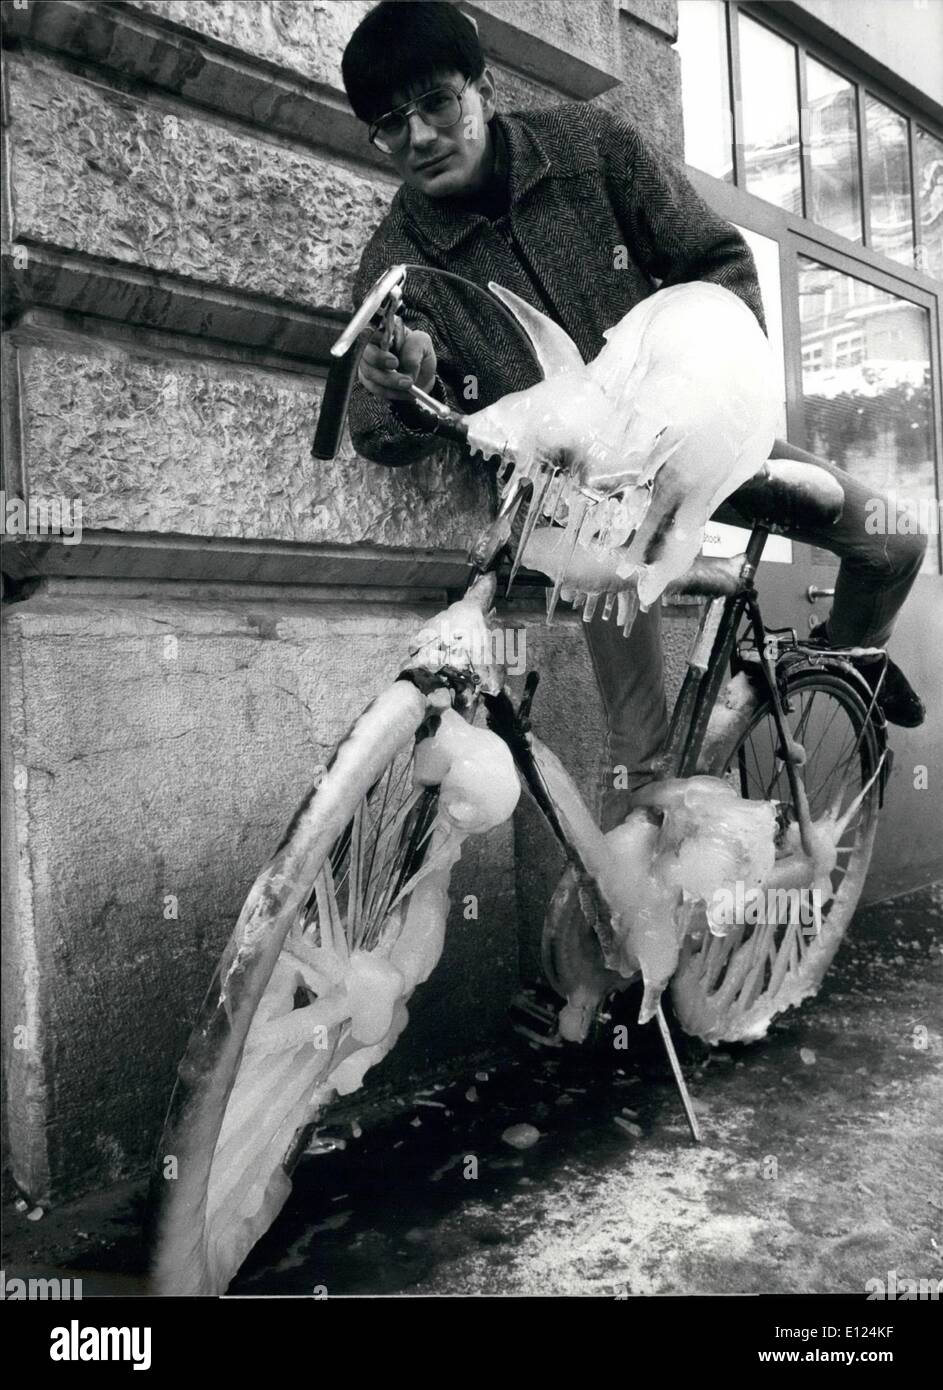 Feb. 02, 1986 - Cycling is not easy; these days in Zurich, as heavy snowfalls and low temperatures made traffic almost impossible. This bicyclist will have some problems to start. Stock Photo